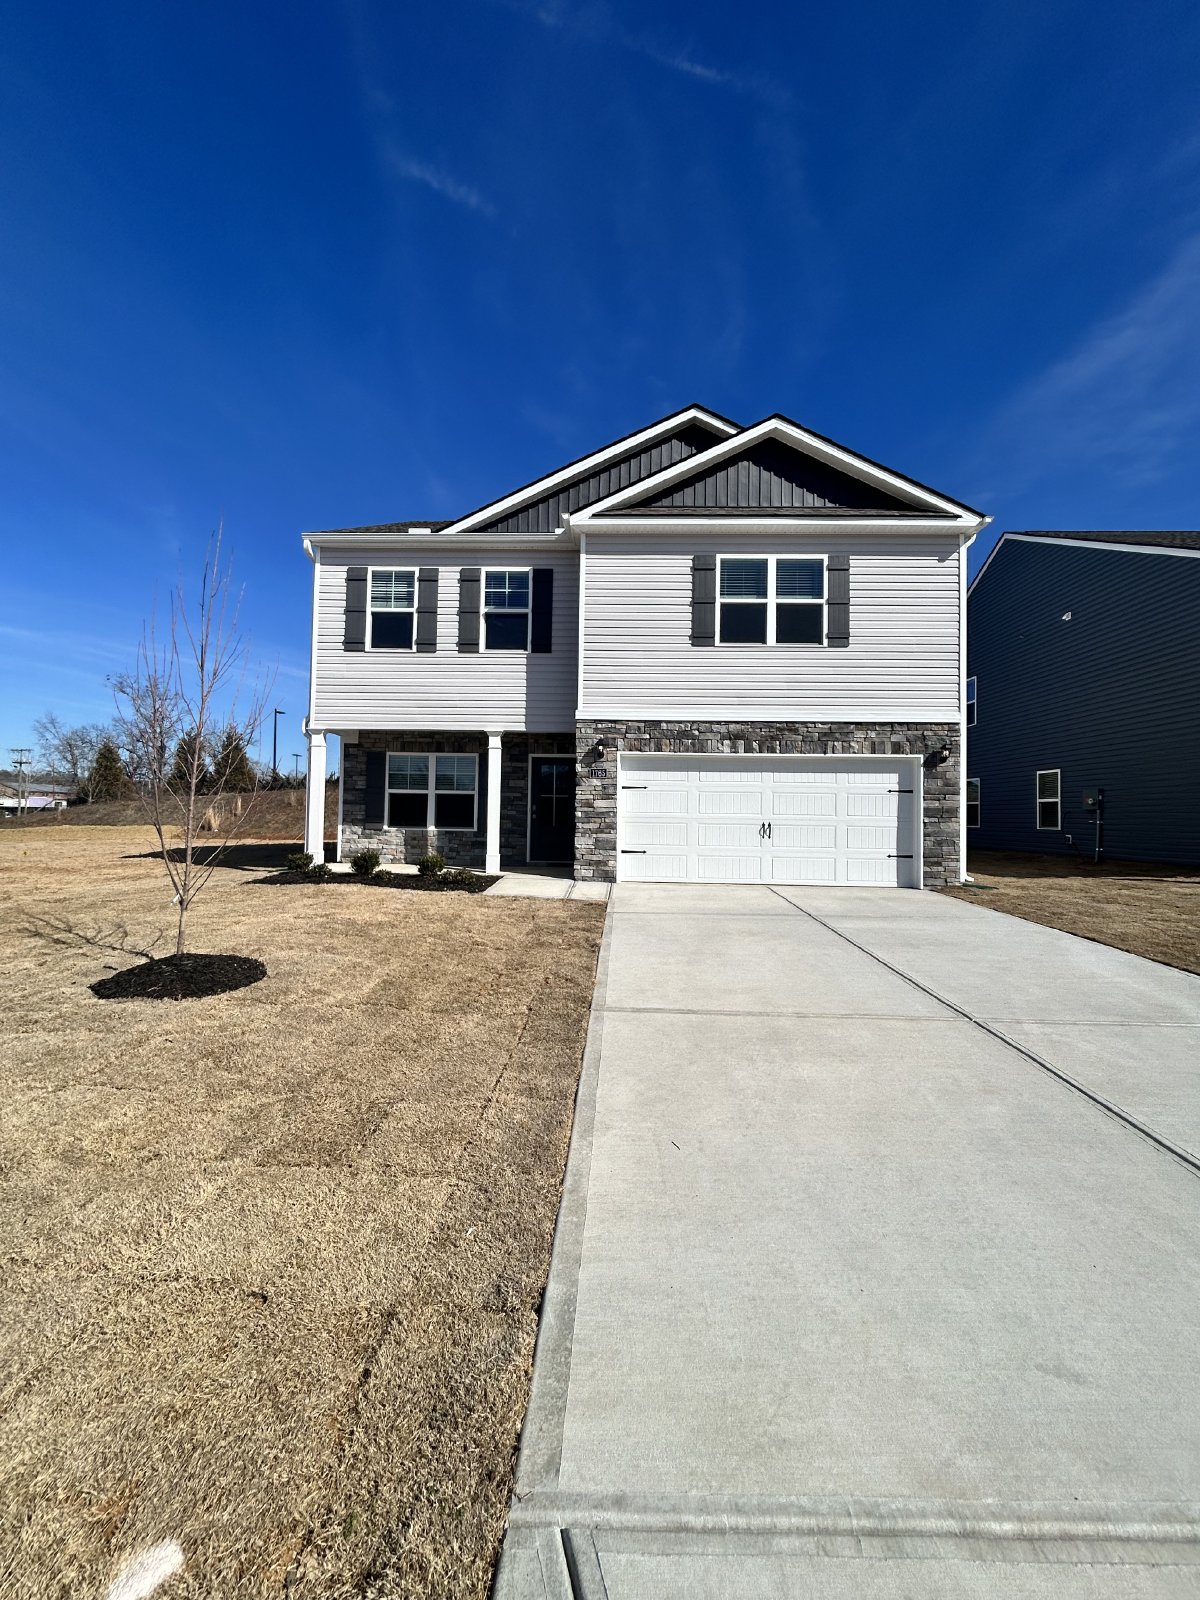 New Build in Hixson! 3 Beds, 2.5 Baths, Loft, Home Office, and 2 Car Garage! property image